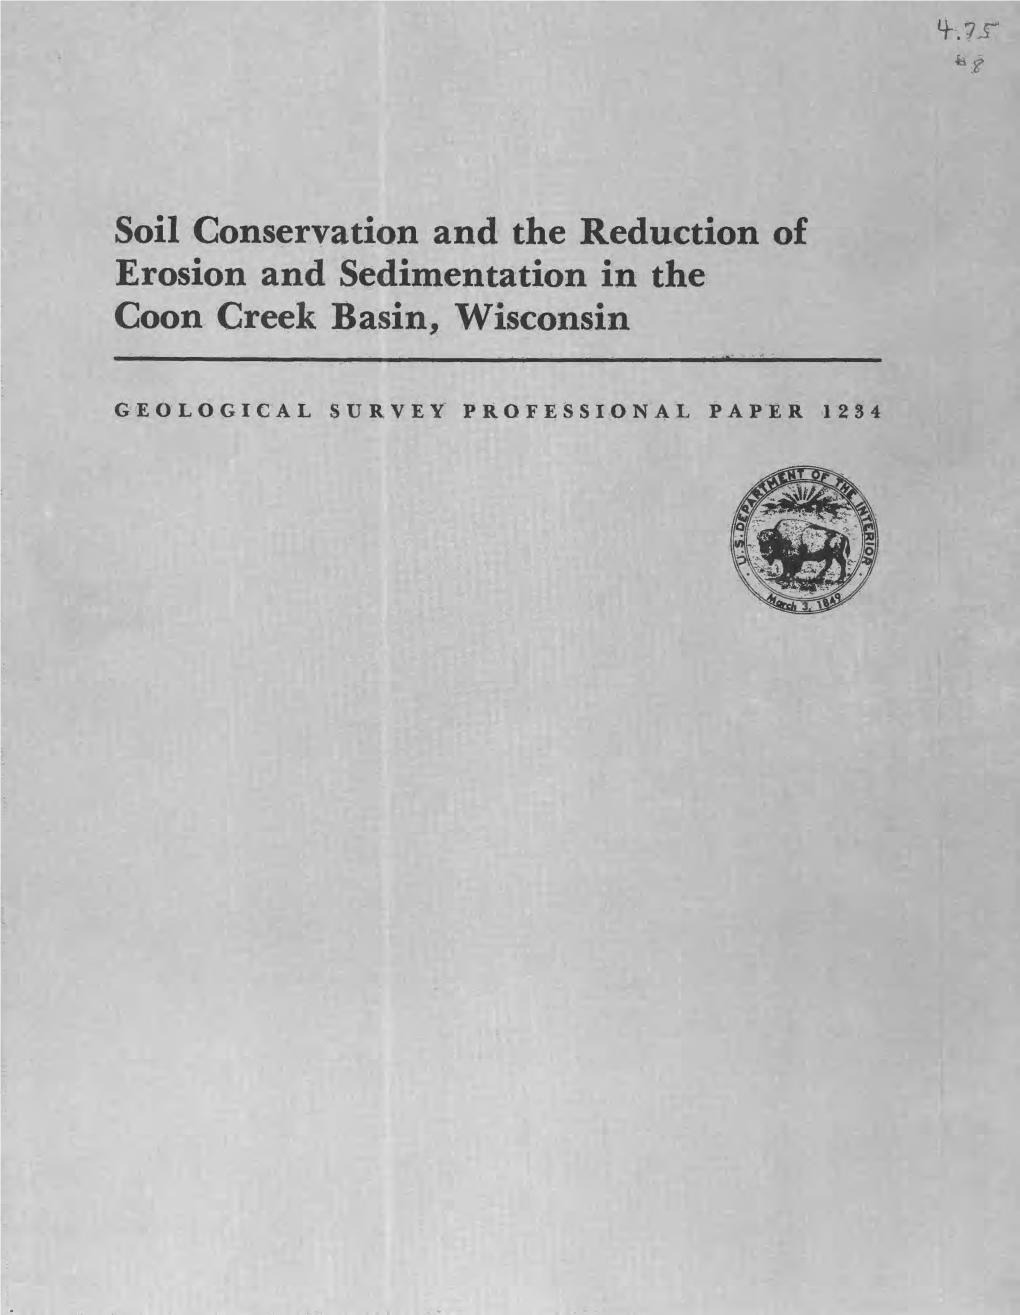 Soil Conservation and the Reduction of Erosion and Sedimentation in the Coon Creek Basin, Wisconsin